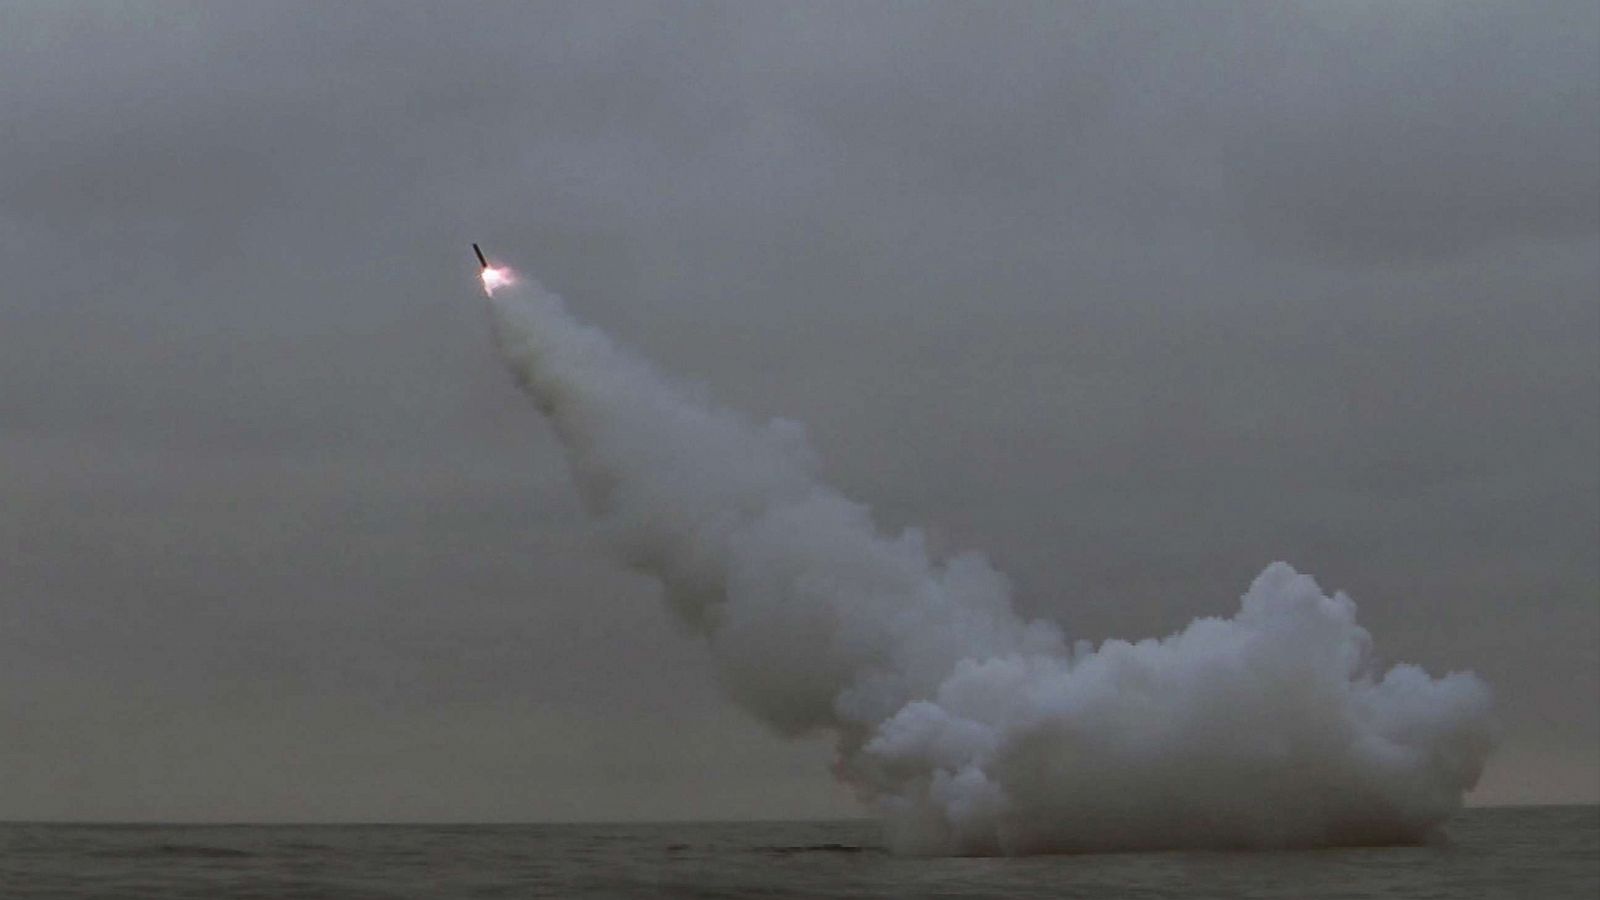 North Korea launches 2 cruise missiles from submarine ahead of US-South Korea military drills - ABC News